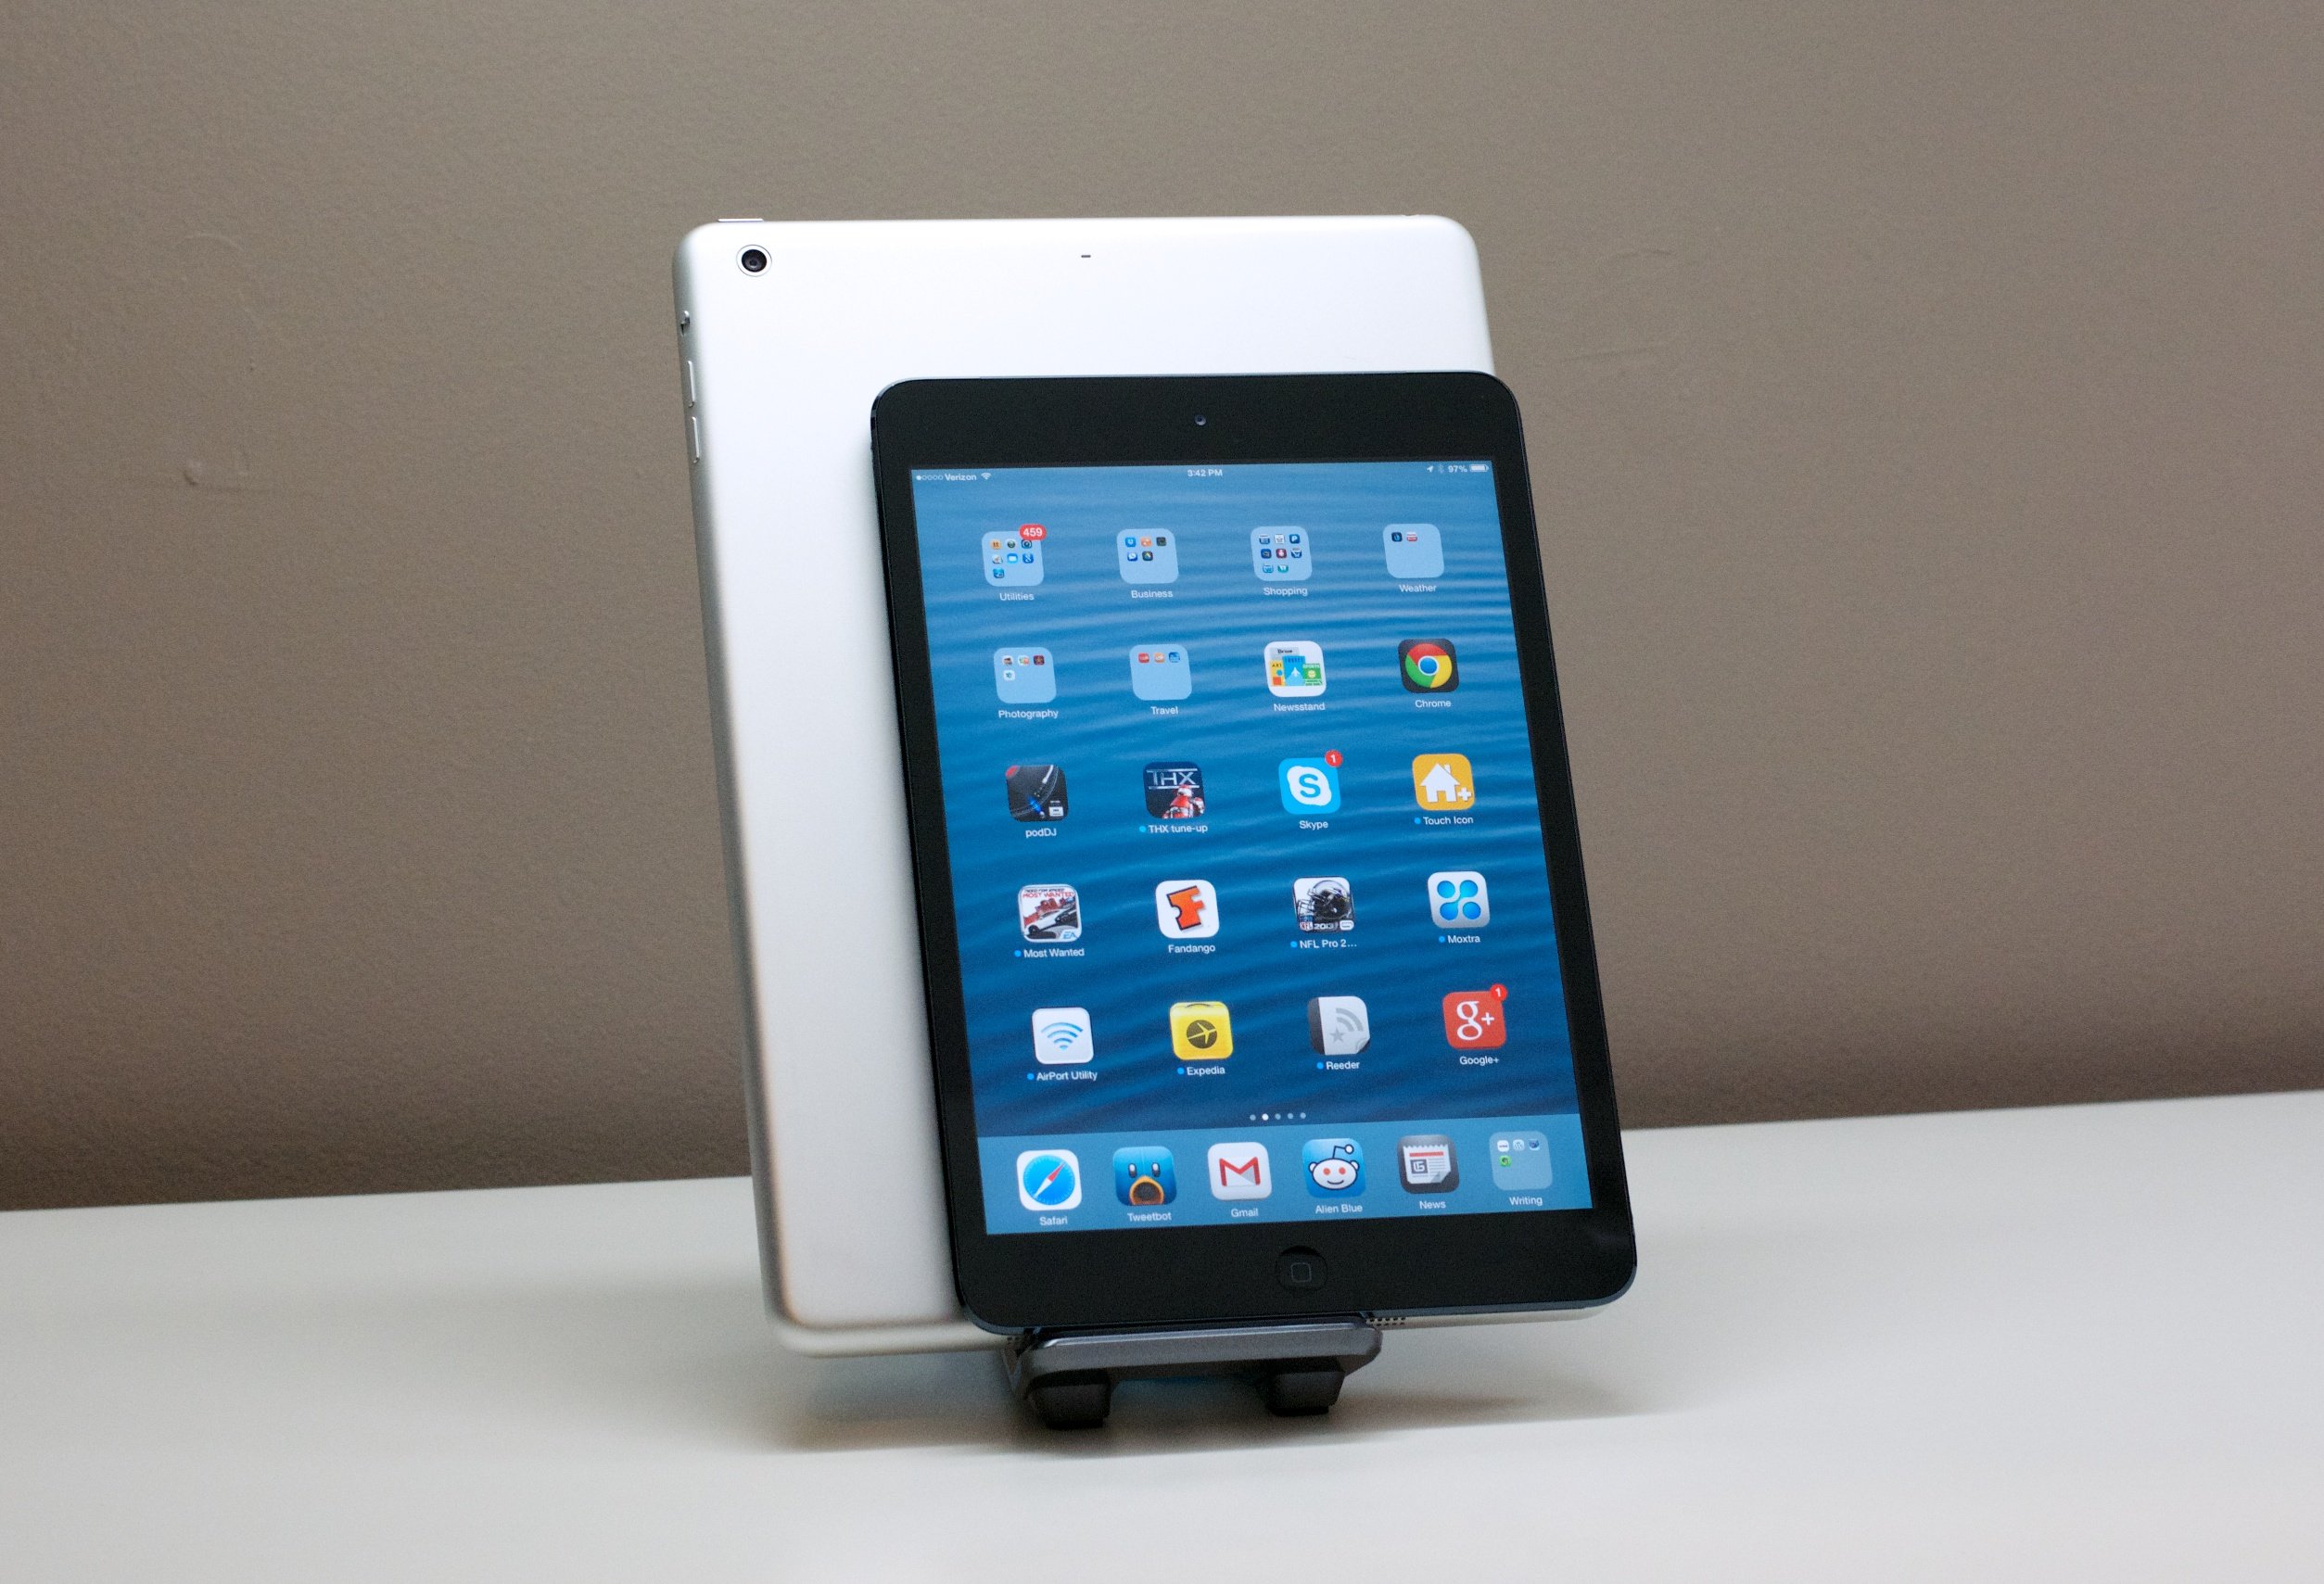 The iPad mini is $200 cheaper but comes with fewer options.